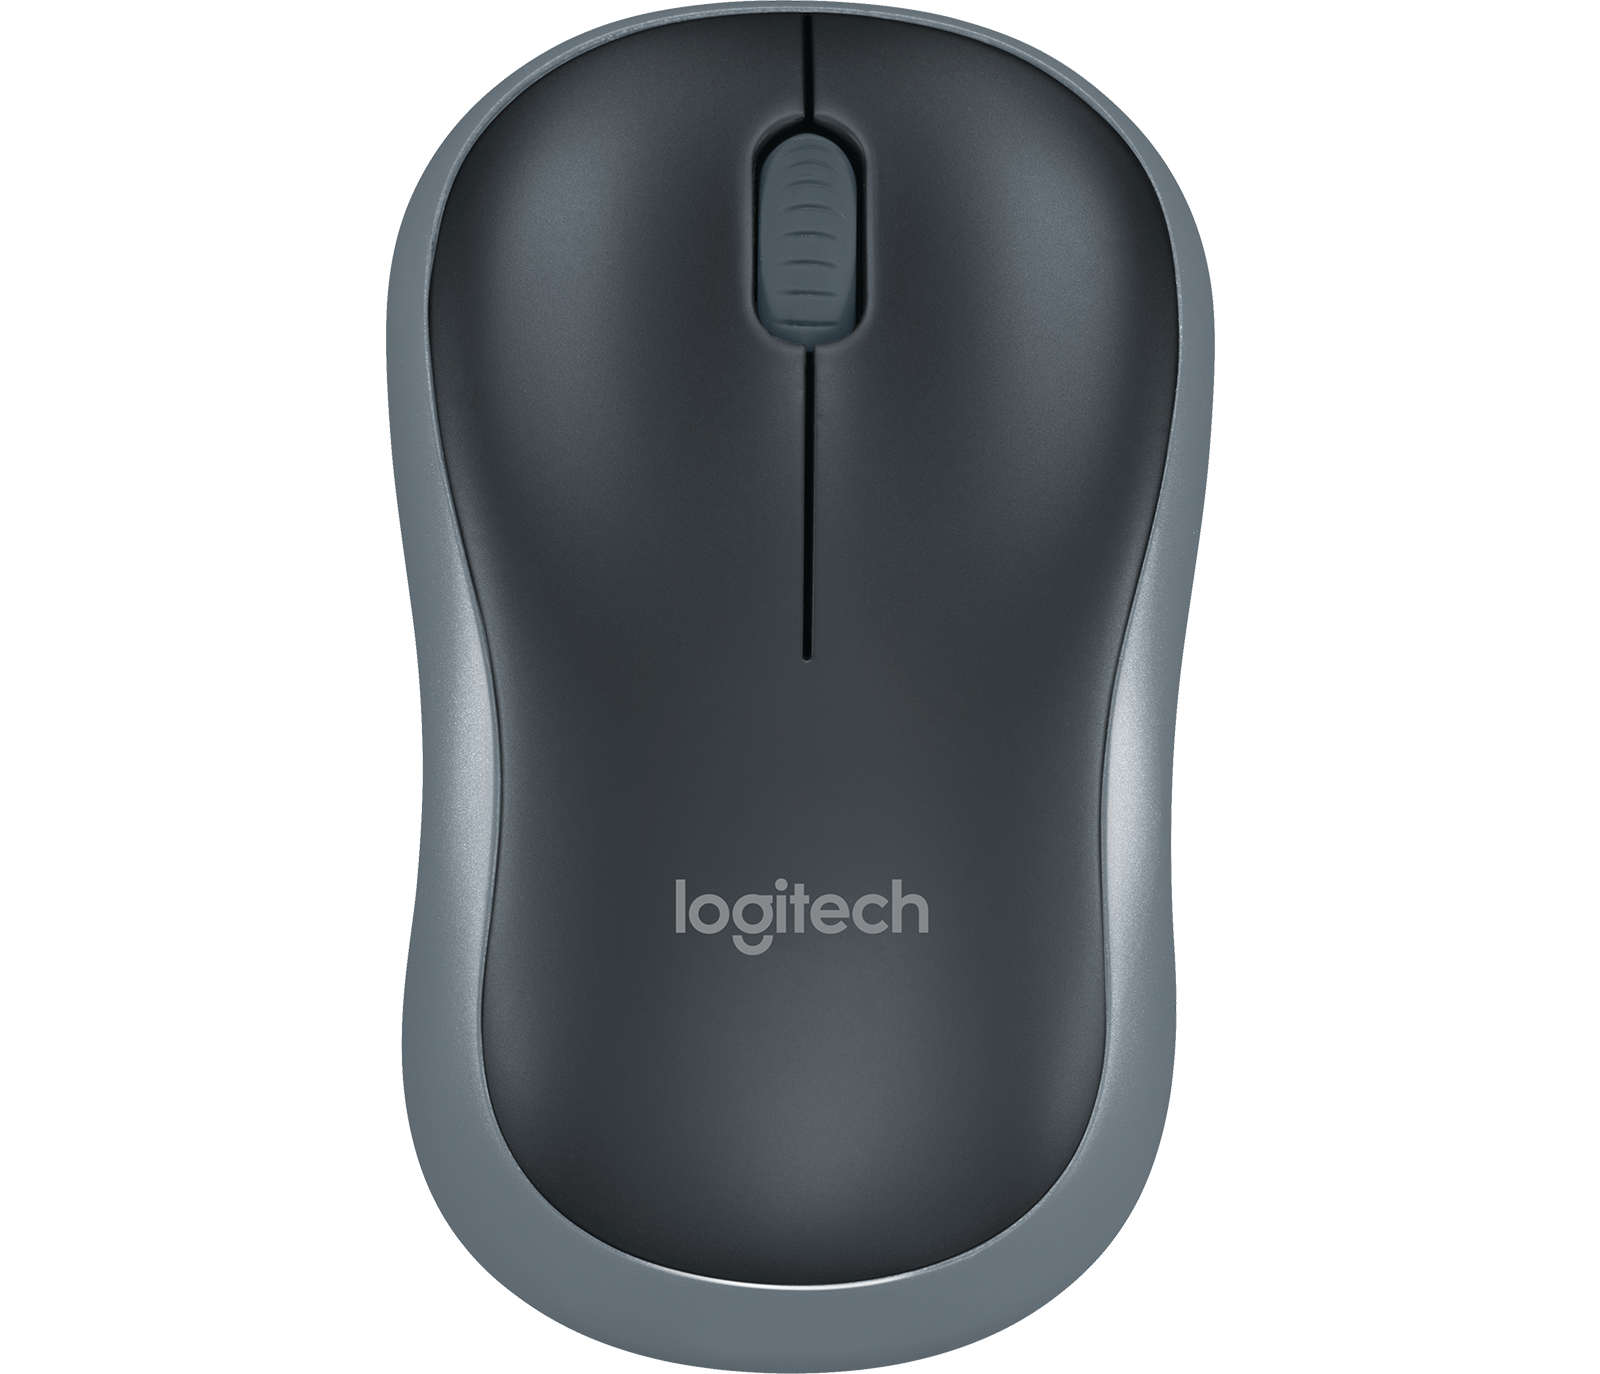 Logitech M185 Compact Wireless Mouse Designed For Laptops